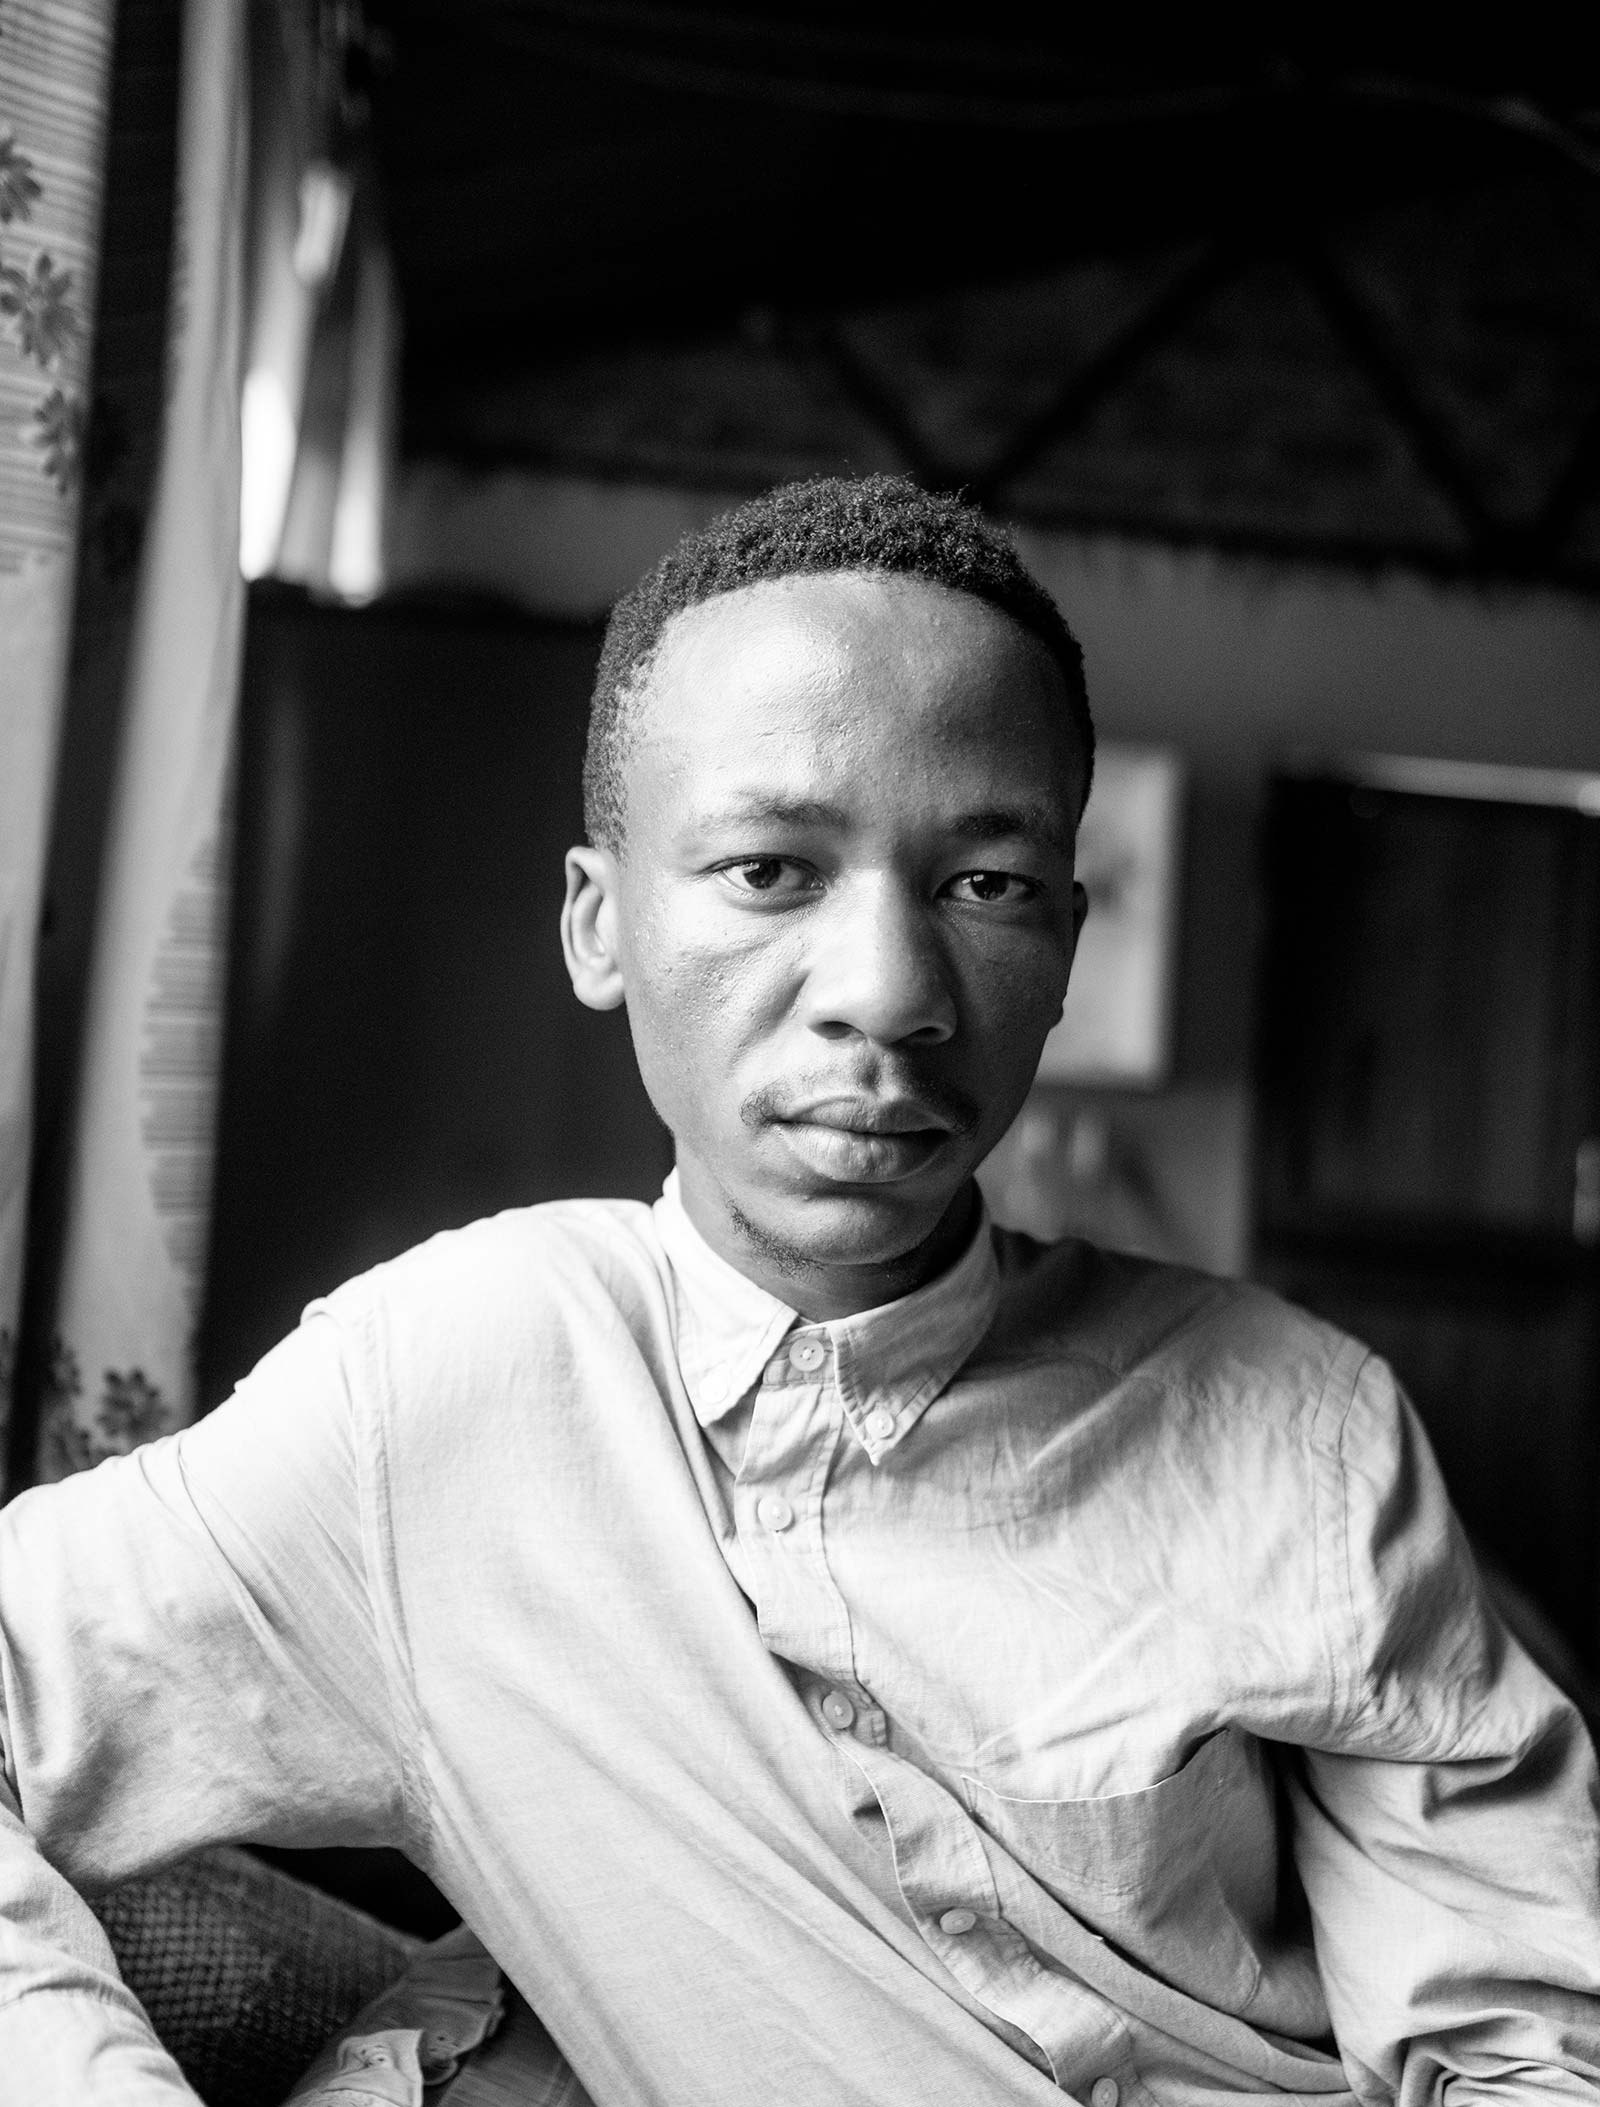 Black and white portrait of Lindokuhle Sobekwa, looking directly at the camera